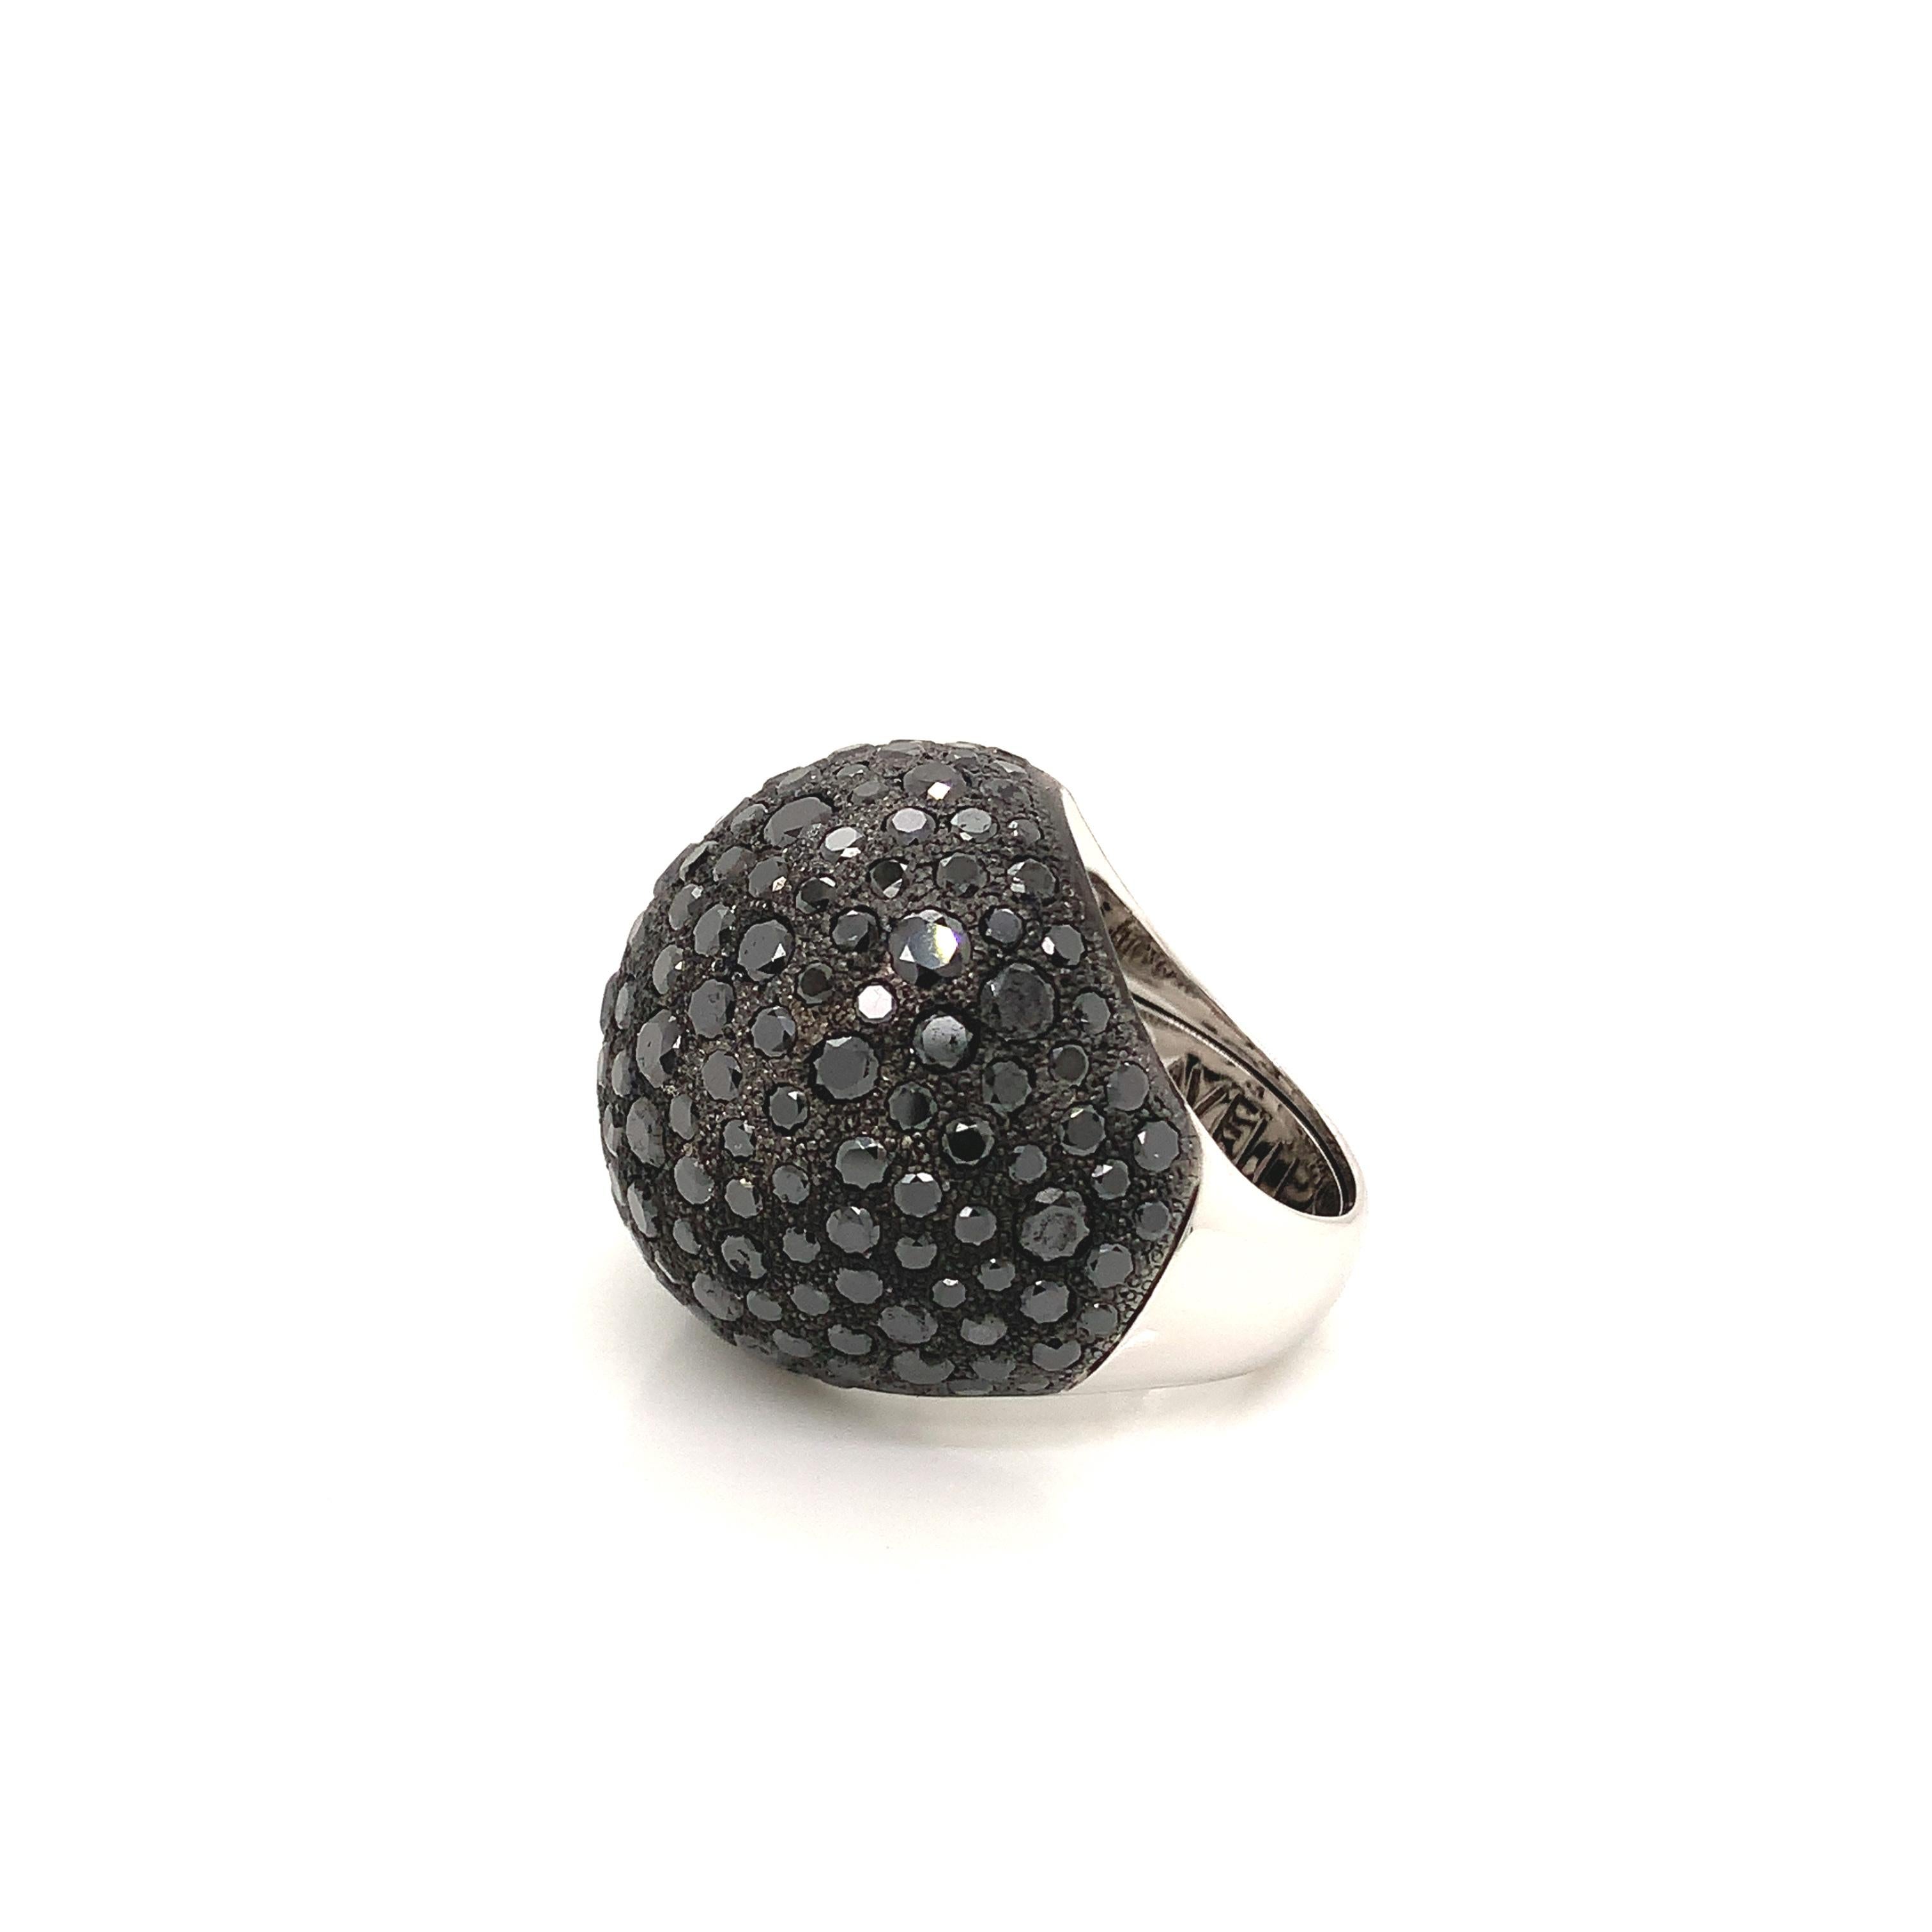 18 Kt Blackened Hand Hammered  White Gold   and   Black Diamonds Garavelli Ring from Lifestyle Collection, a collection of bold, estetically innovative jewlery pieces.
The rings has a sizing guard inside the shank for a  smaller fit . Customisation